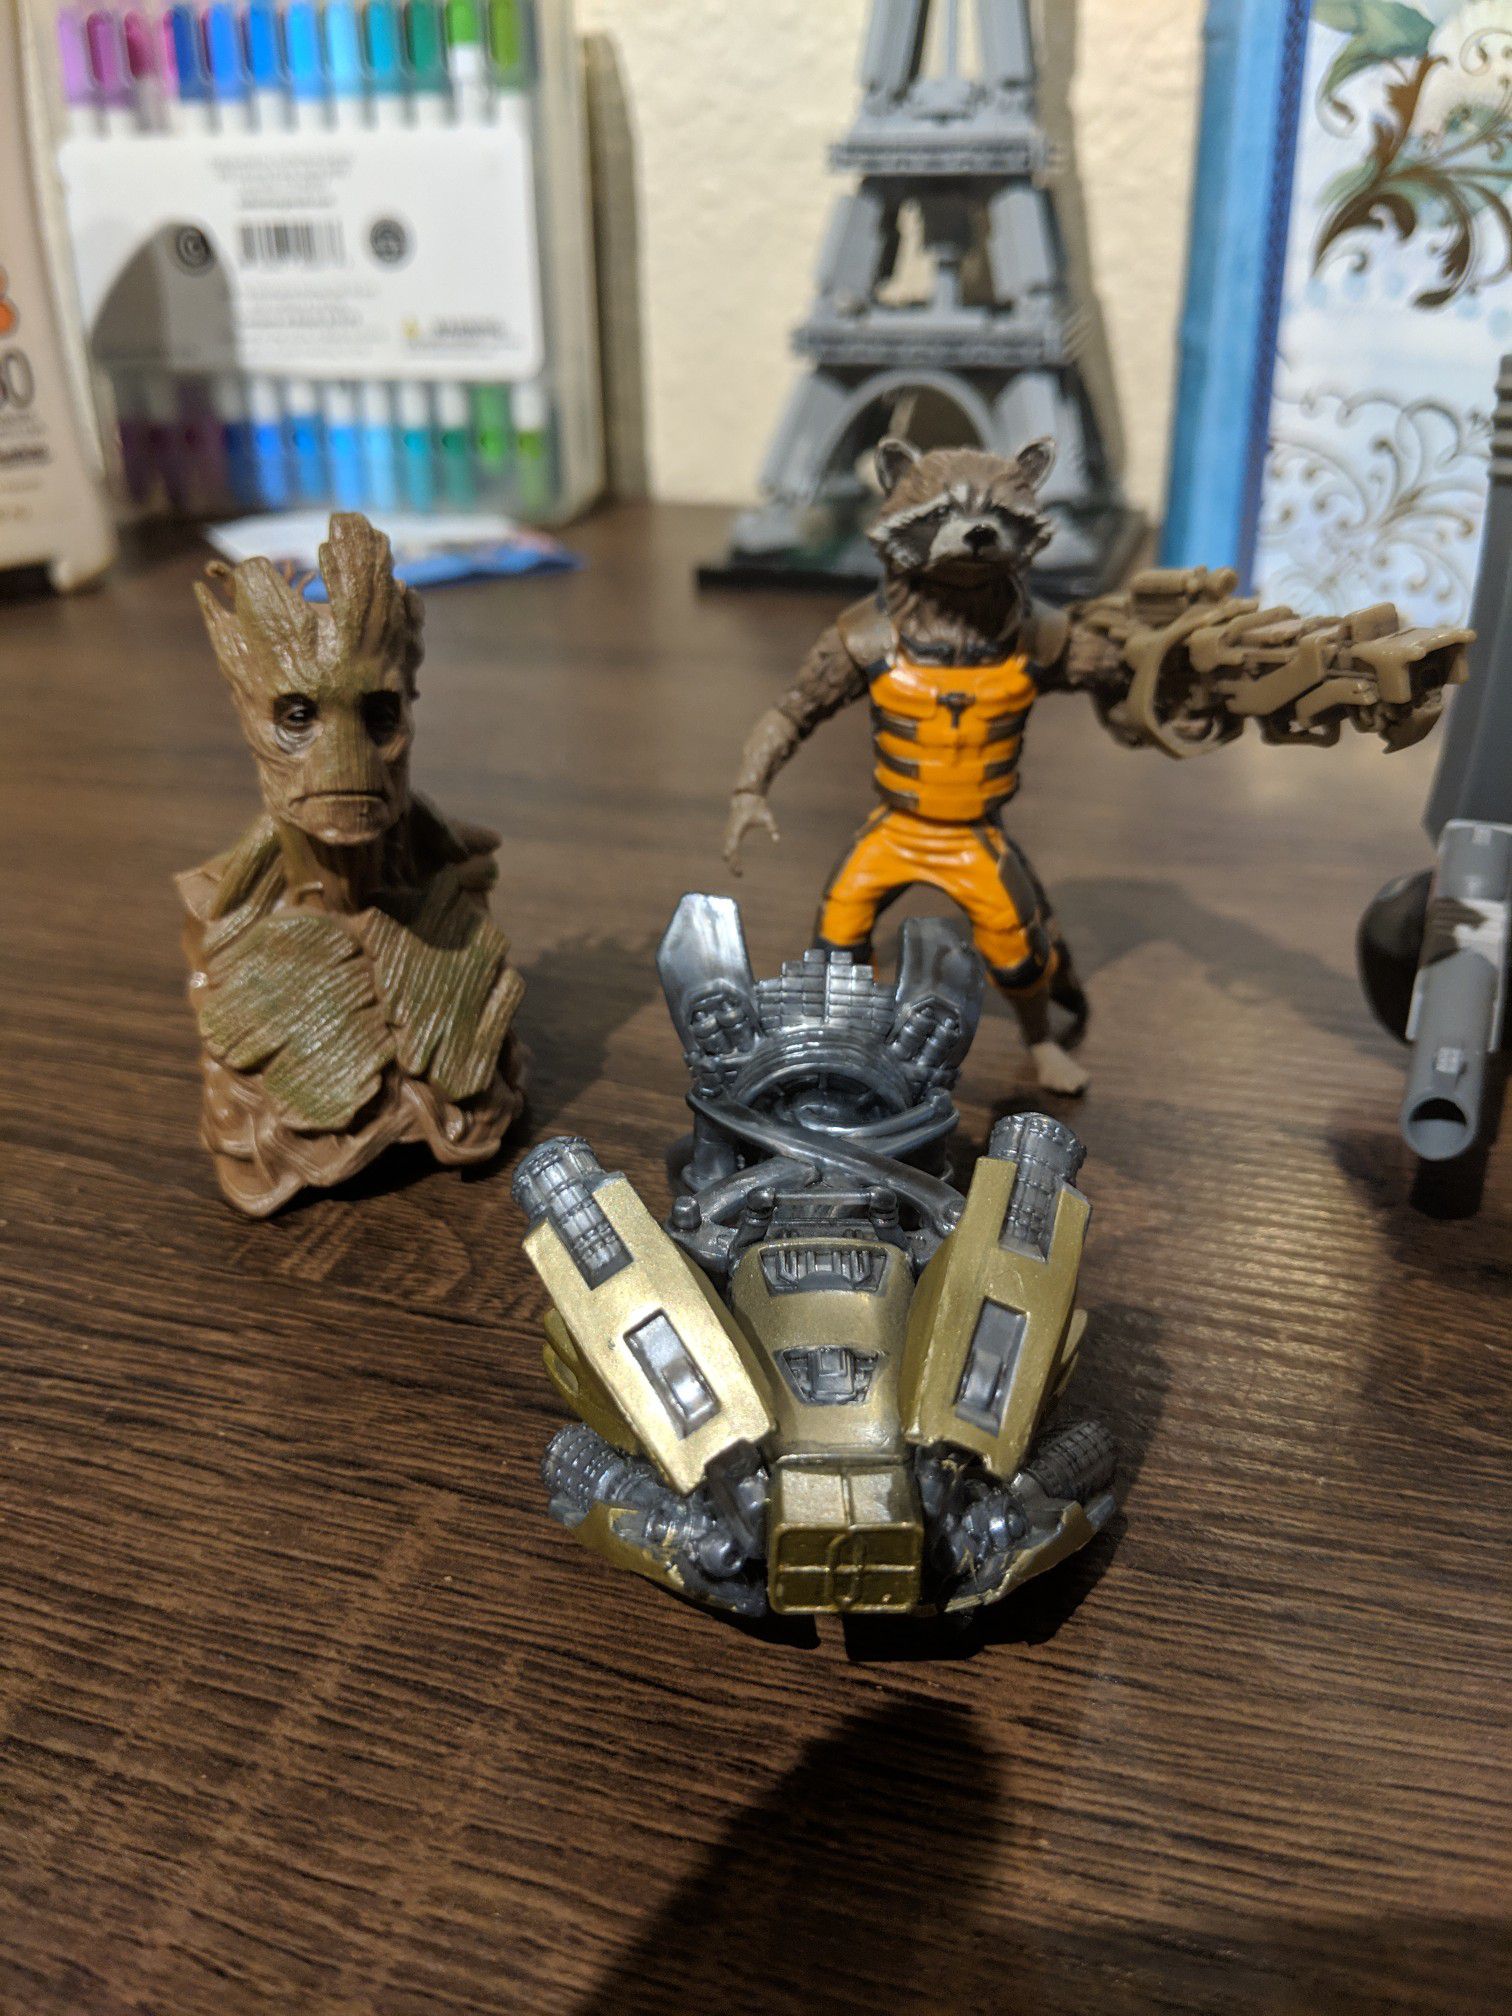 Toy Variety Pack! Ft. Rocket, Groot, Loot crate Exclusive figures, Hexbug, and more